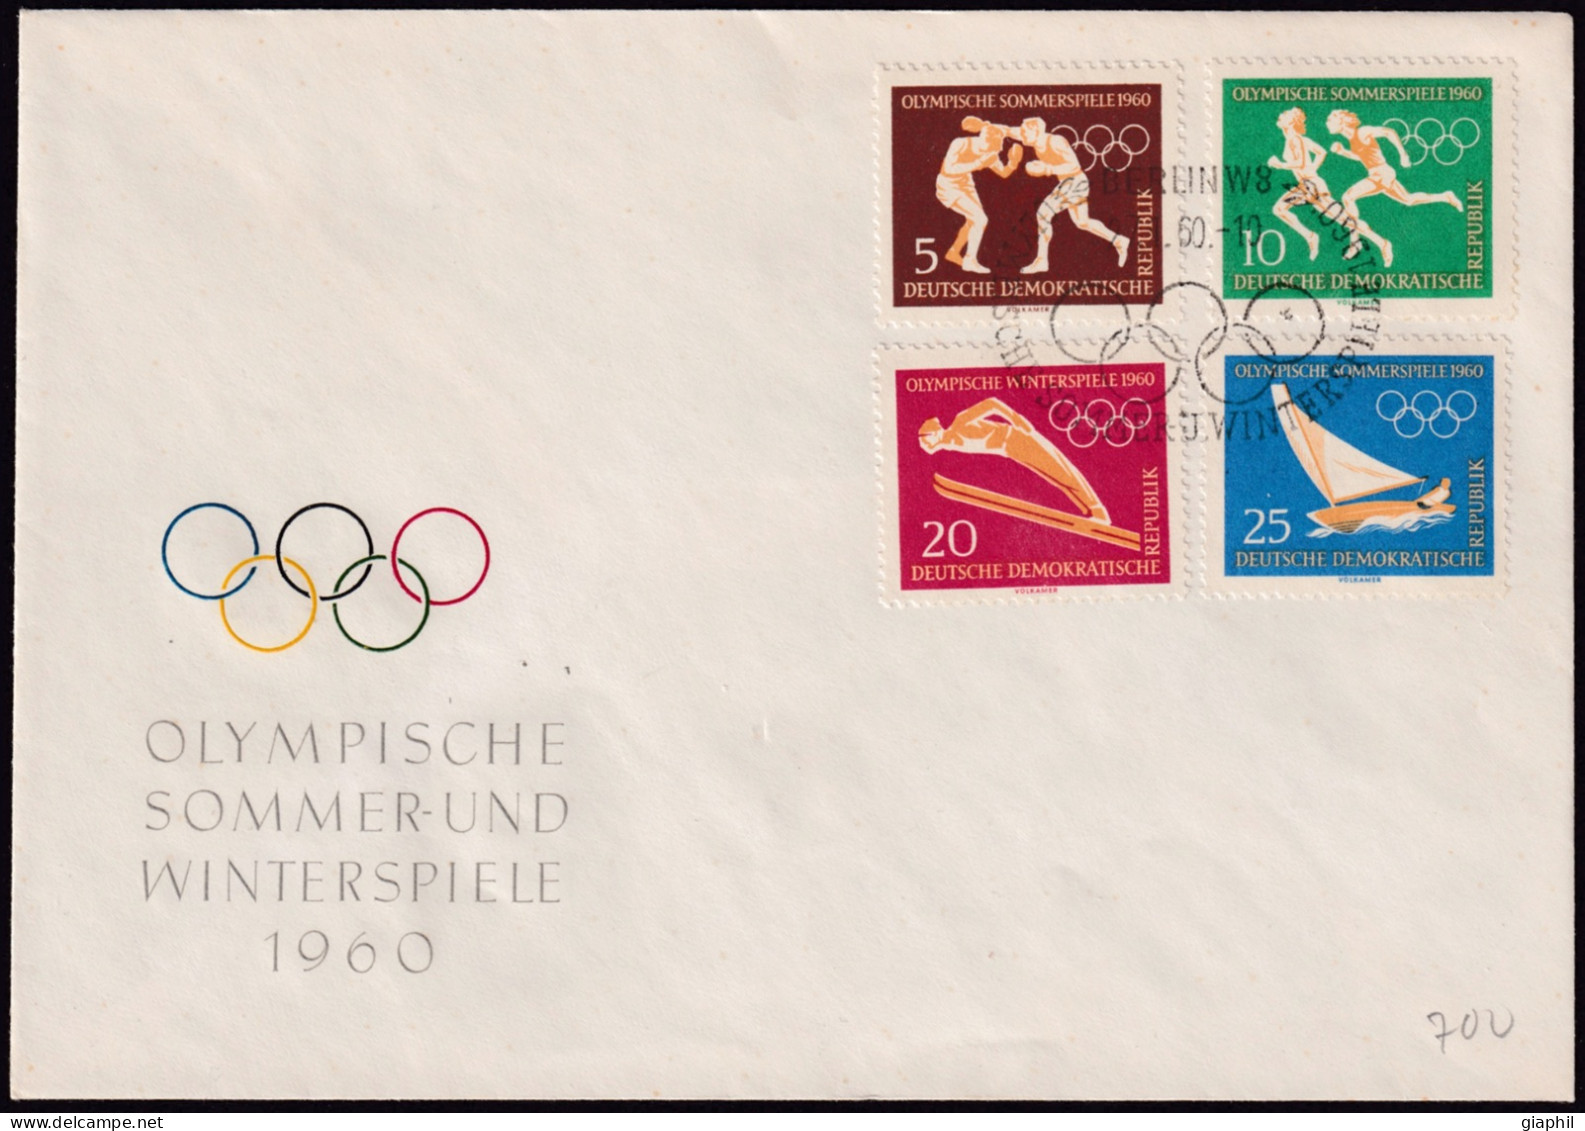 GERMANY EAST - DDR 1960 FDC ROME OLYMPIC GAMES (Mi. 746-749)  OFFER! - Verano 1960: Roma